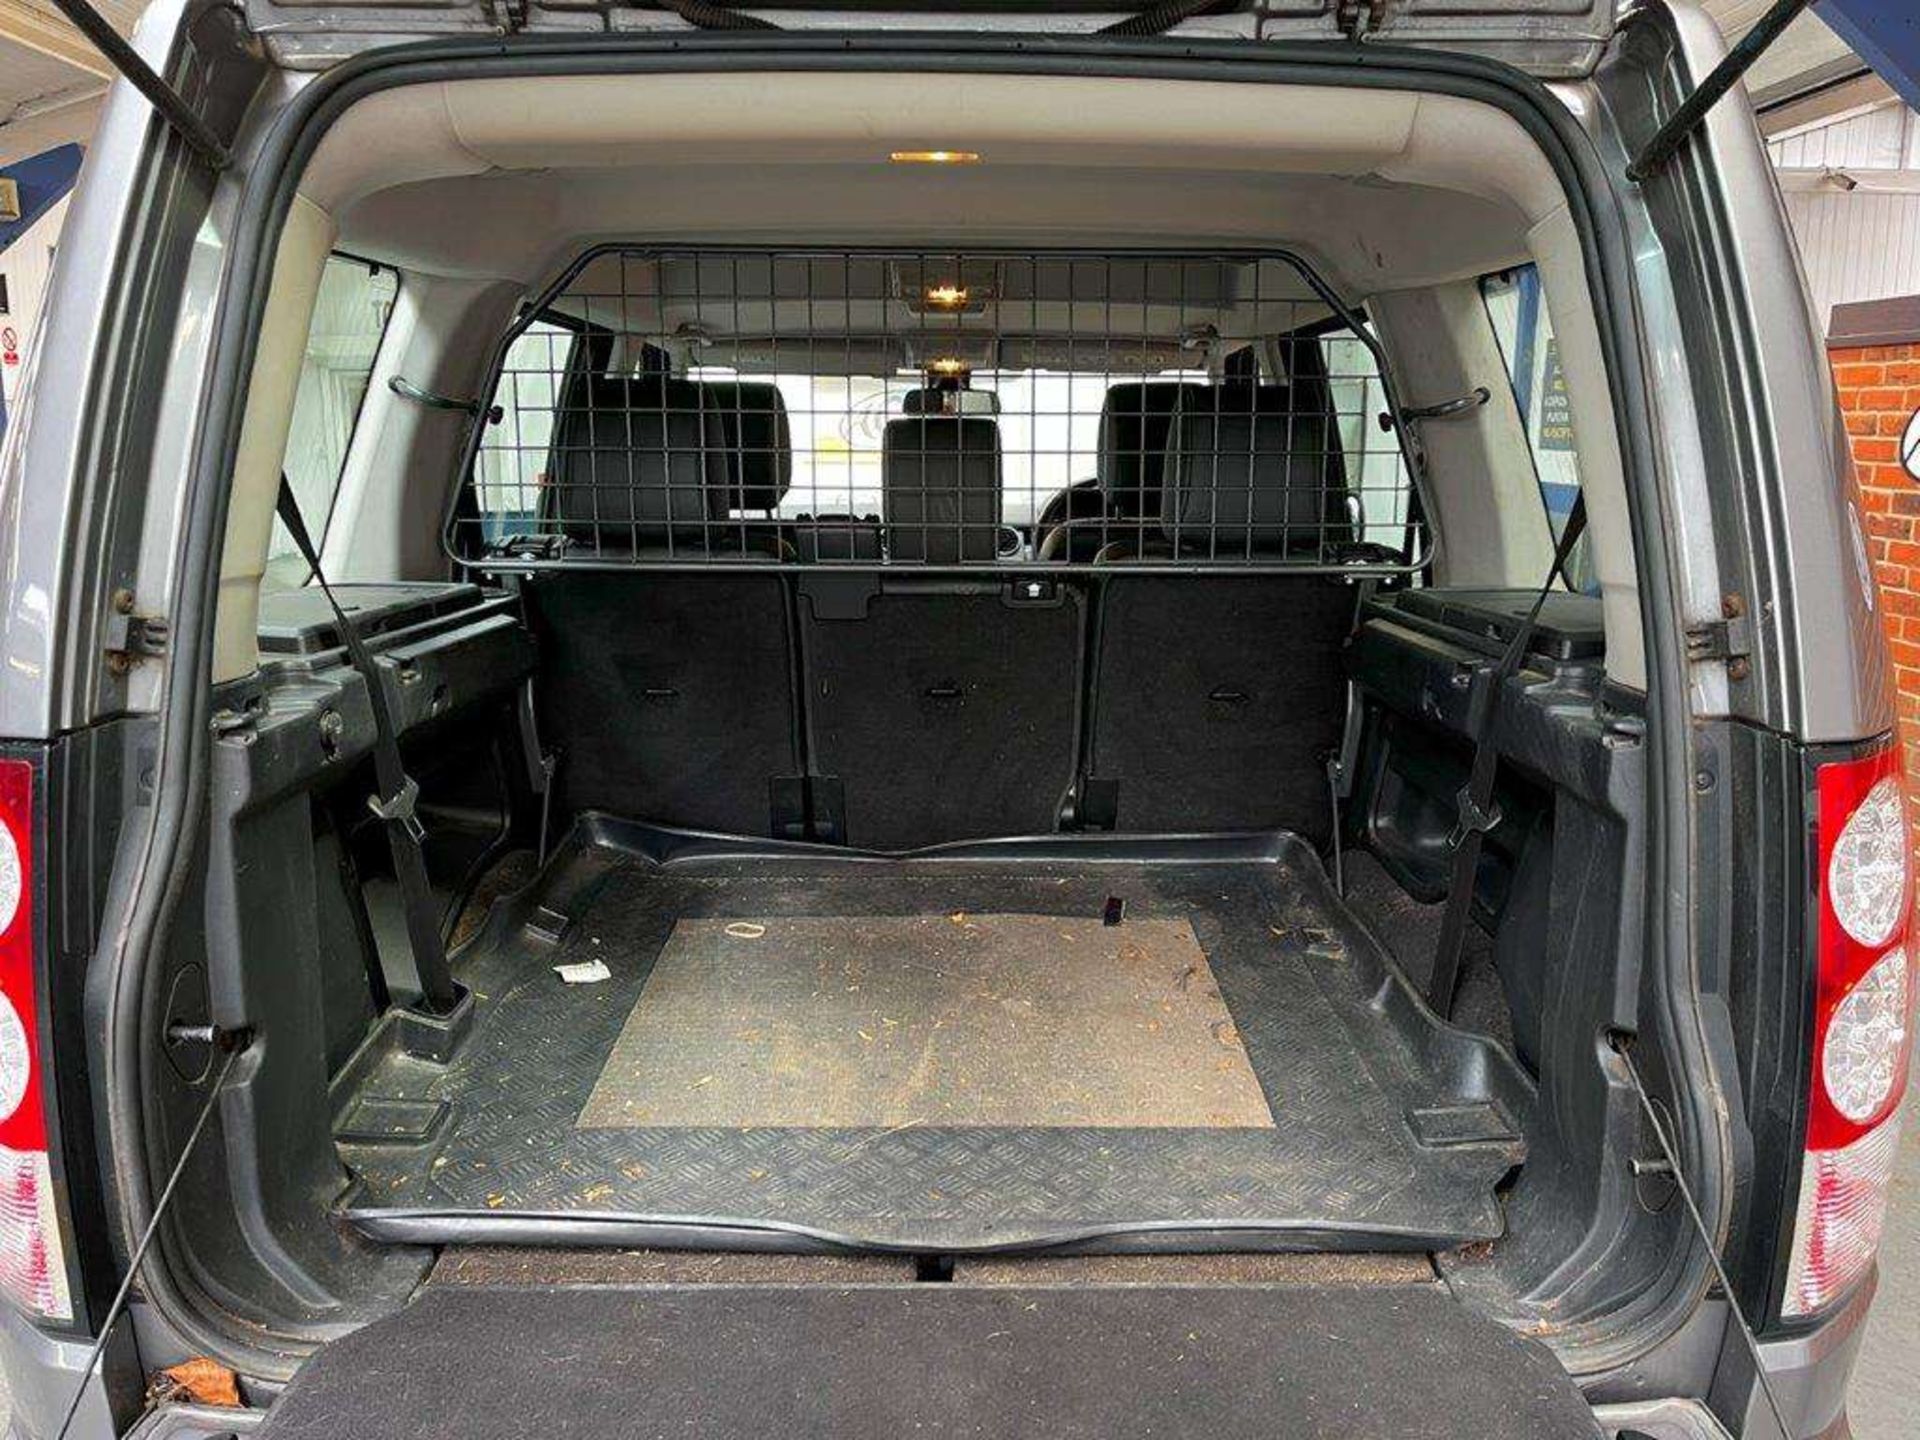 2013 LAND ROVER DISCOVERY XS SDV6 AUTO - Image 8 of 29